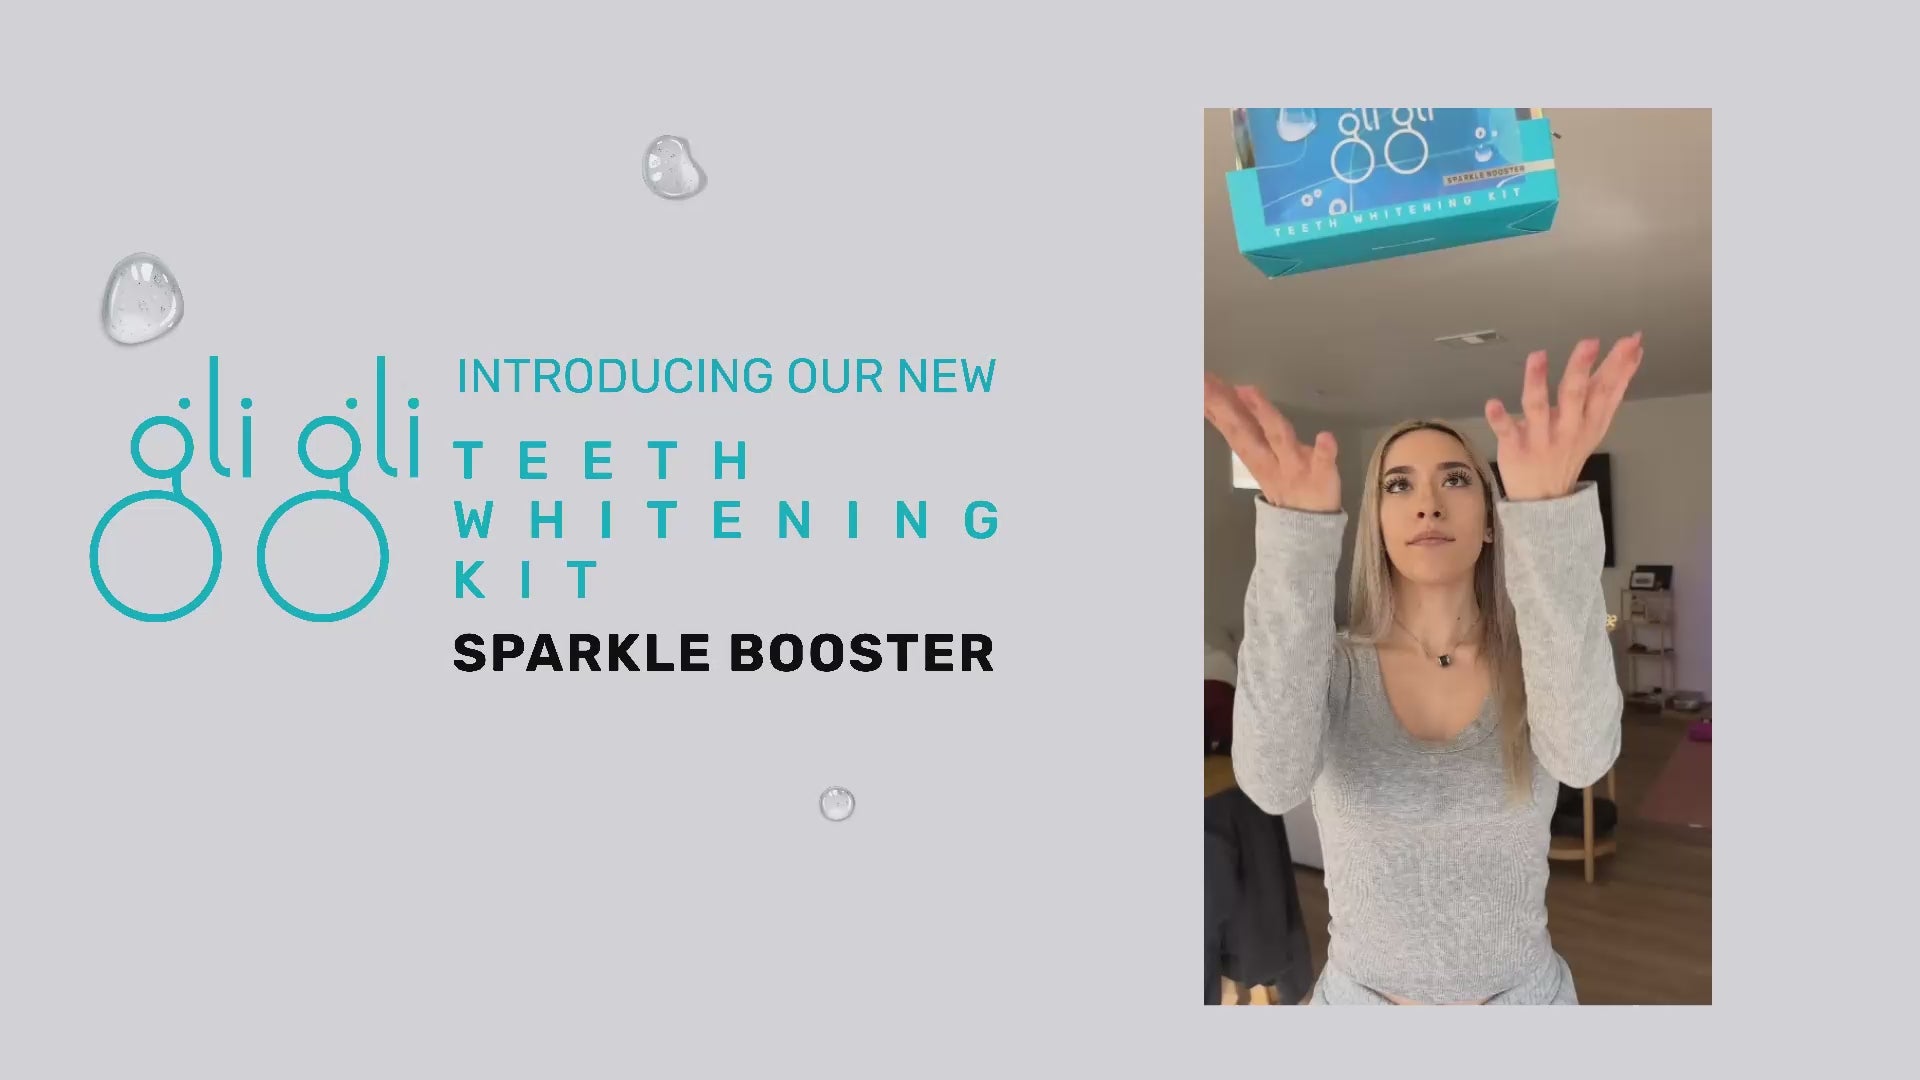 Load video: How to use Super Sparkle Booster Teeth Whitening Kit | Gli Gli